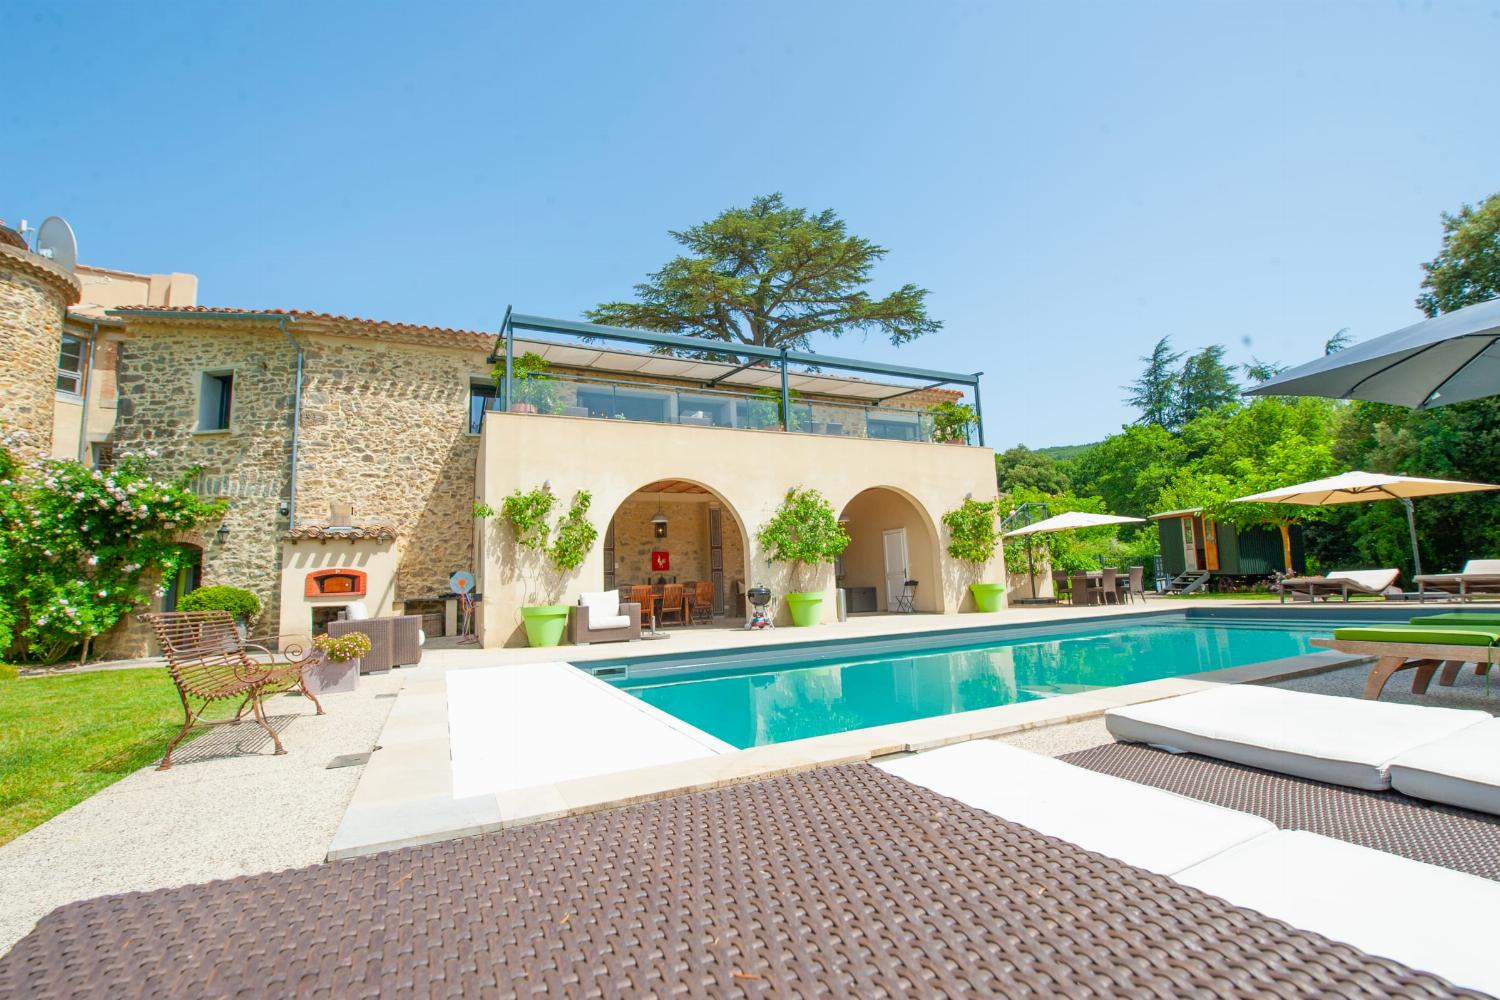 Holiday accommodation in the South of France with private heated pool